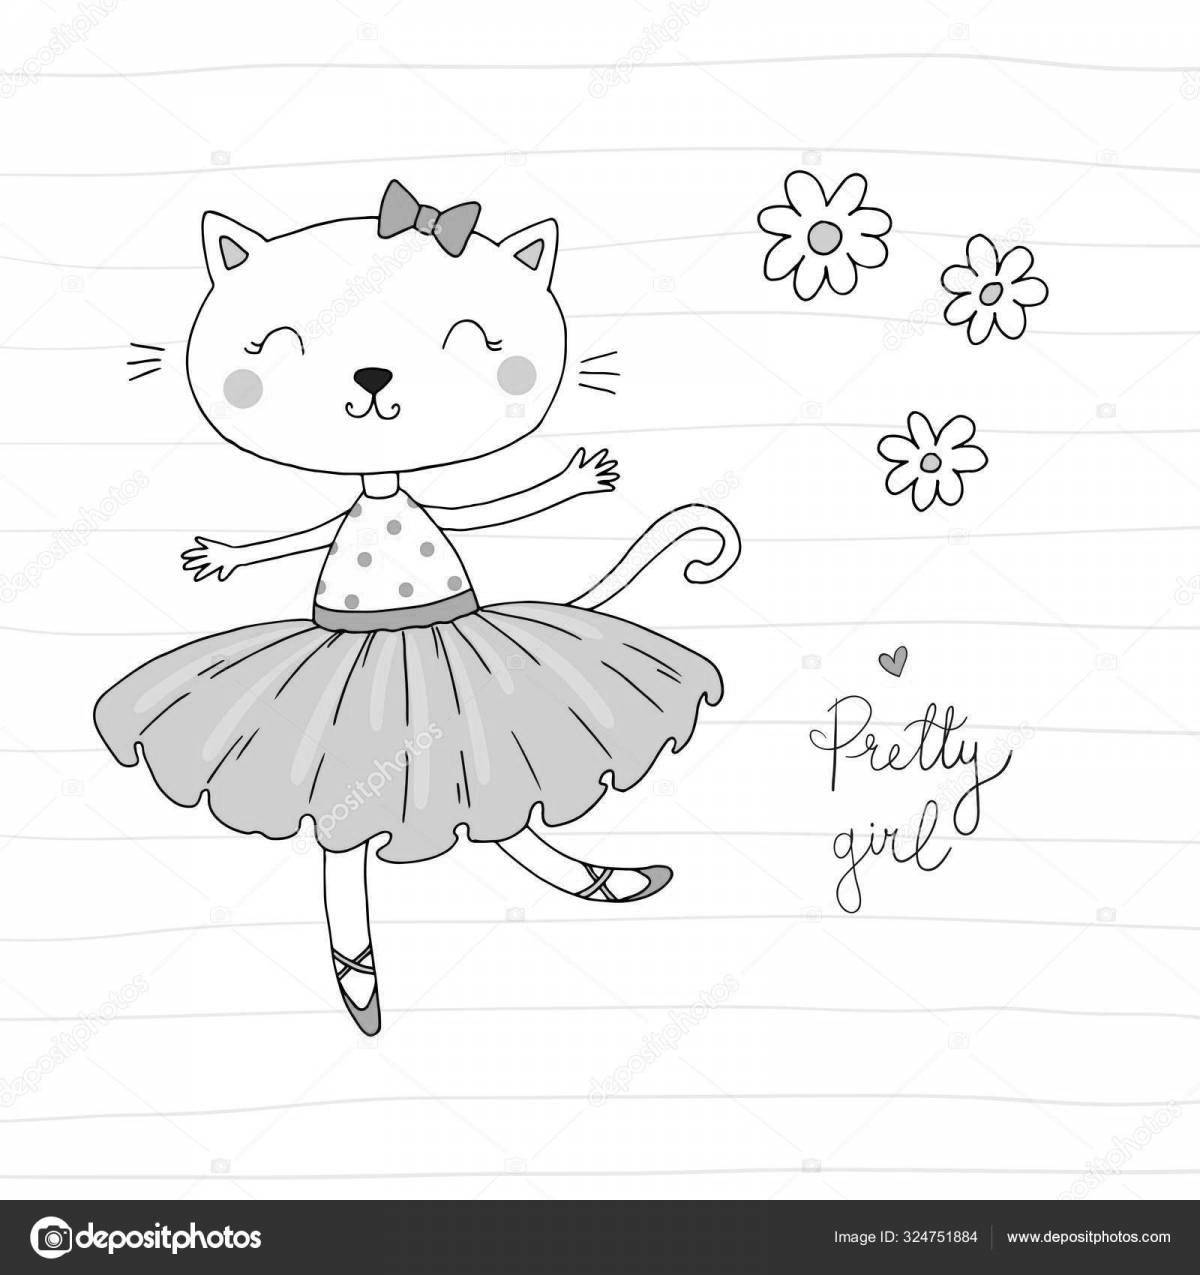 Coloring page nice ballerina cat